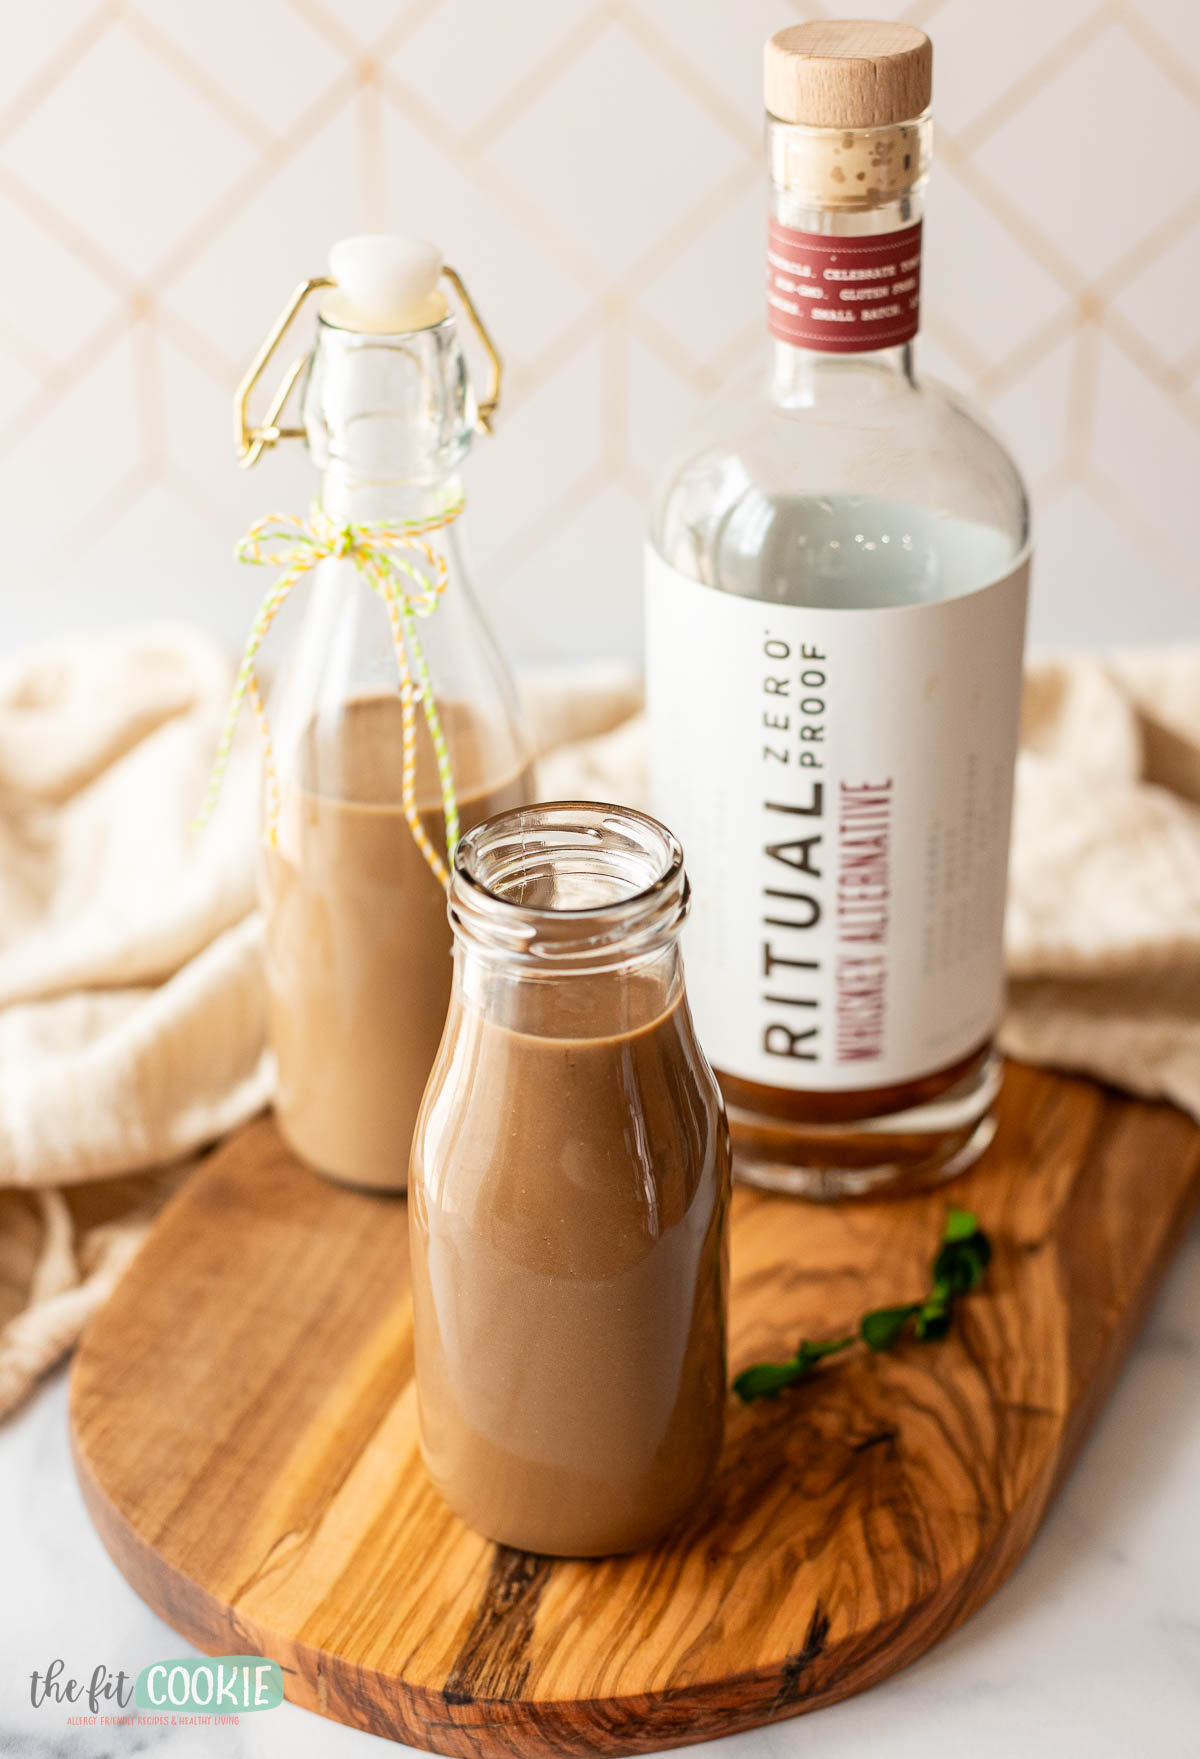 A bottle of homemade dairy-free irish cream on a wooden cutting board.